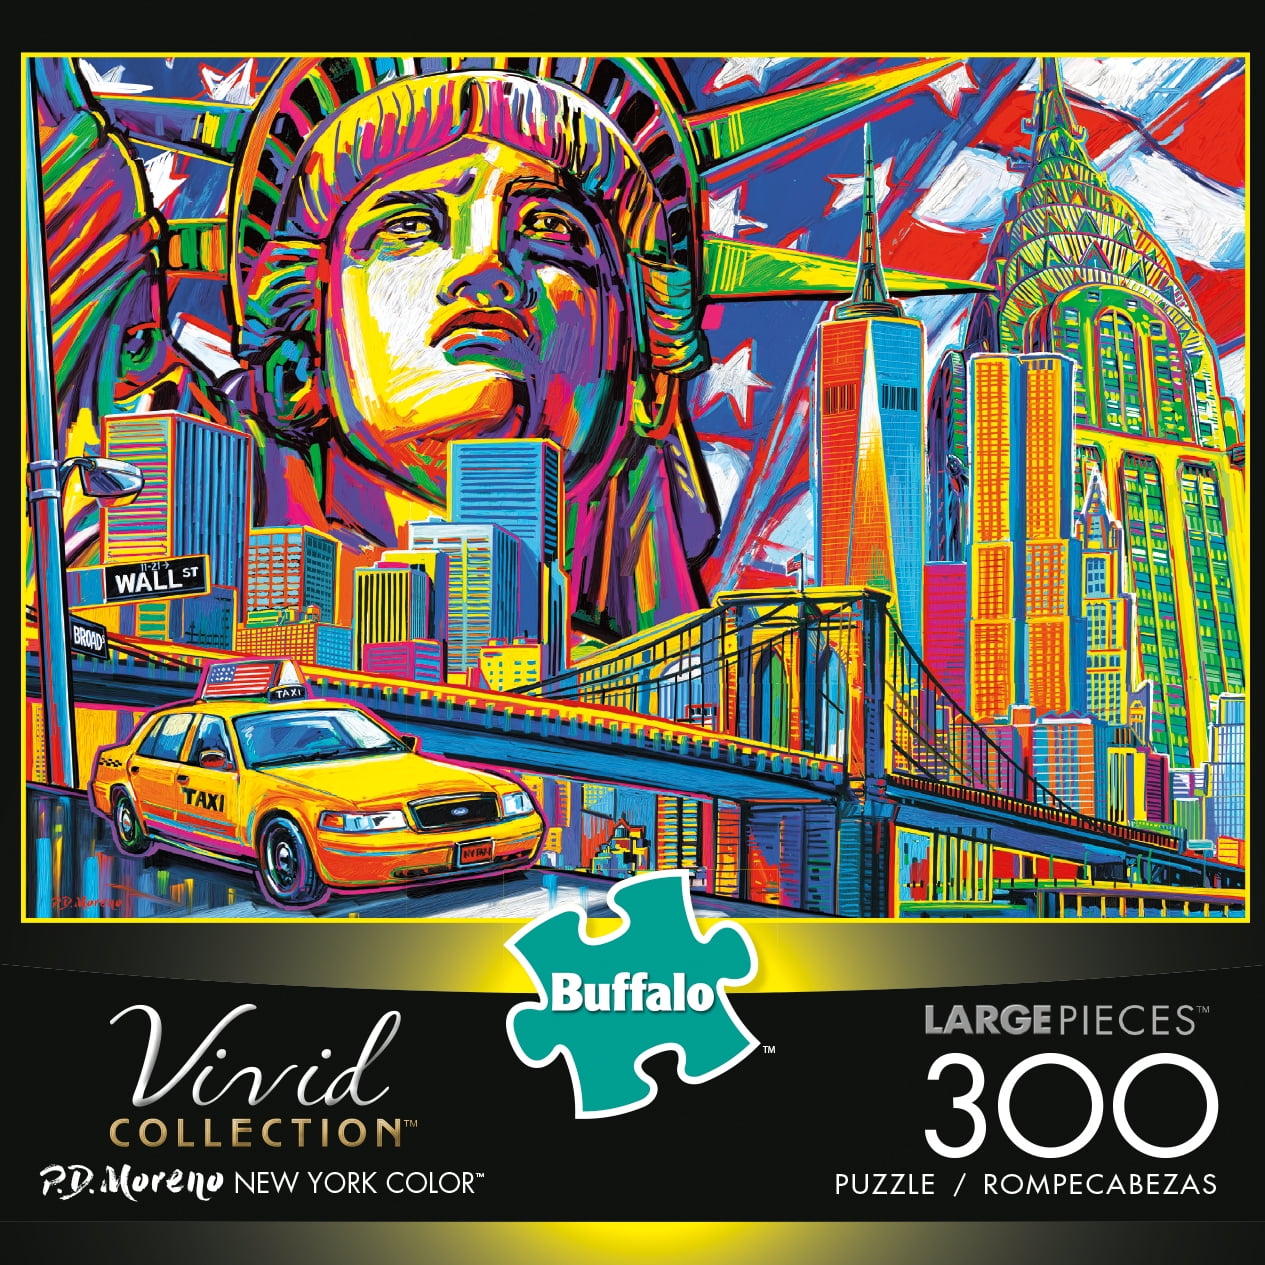 Buffalo Games Vivid Collection Color Challenge 1000 Pc Jigsaw Puzzle 26 X 19 for sale online